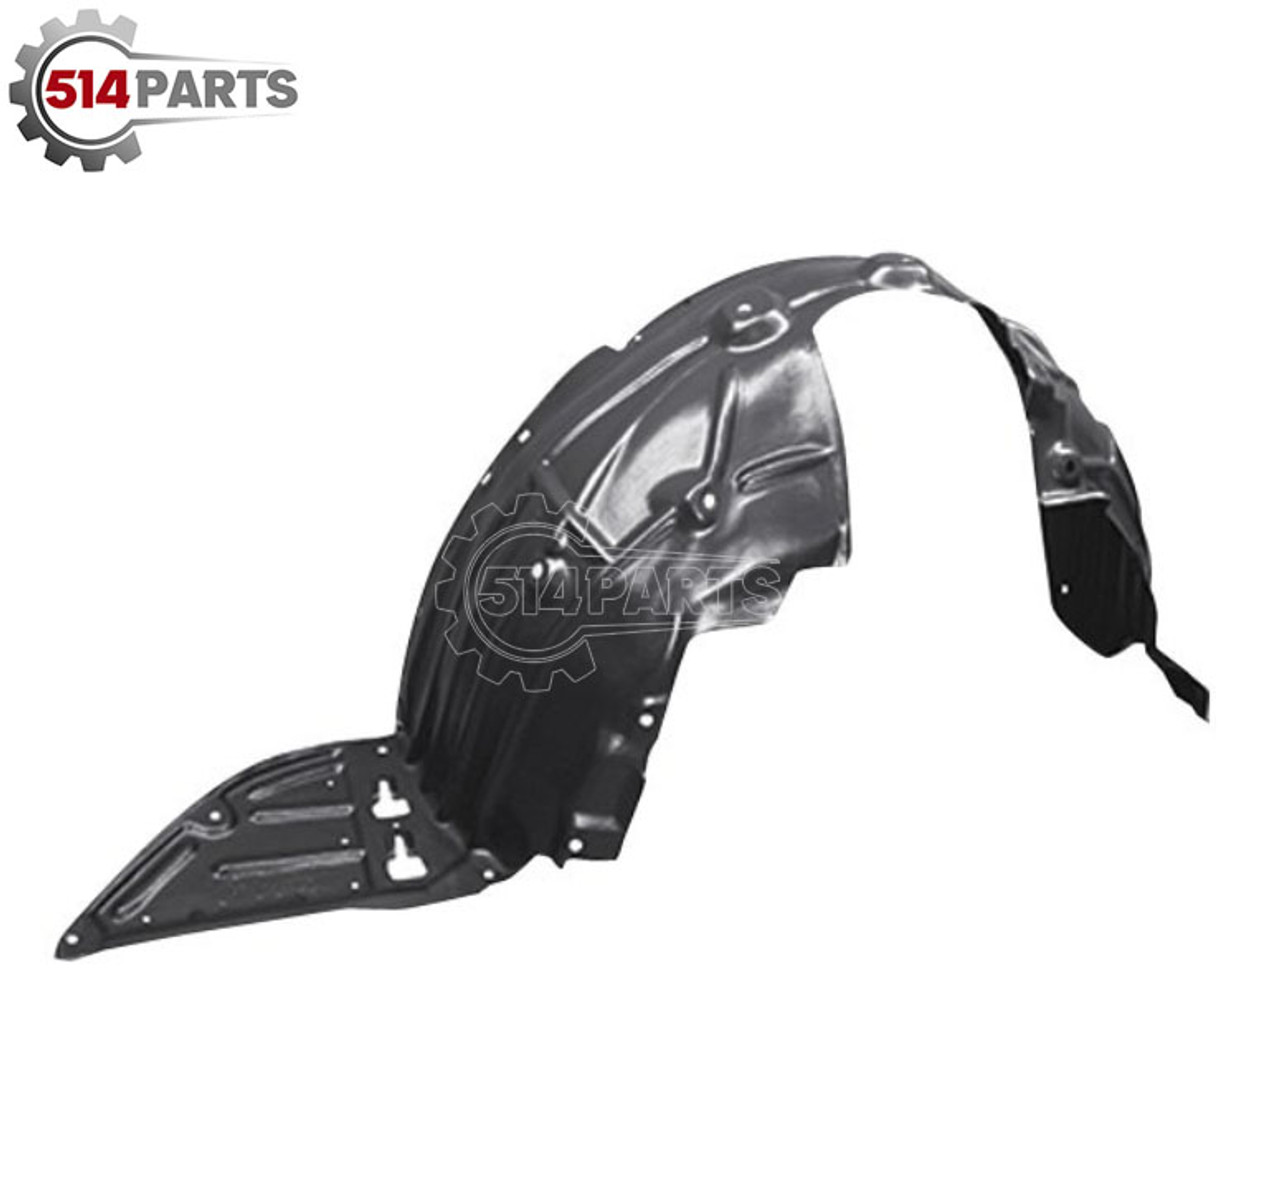 2016 - 2021 MAZDA CX-3 FENDER LINER - FAUSSE AILE